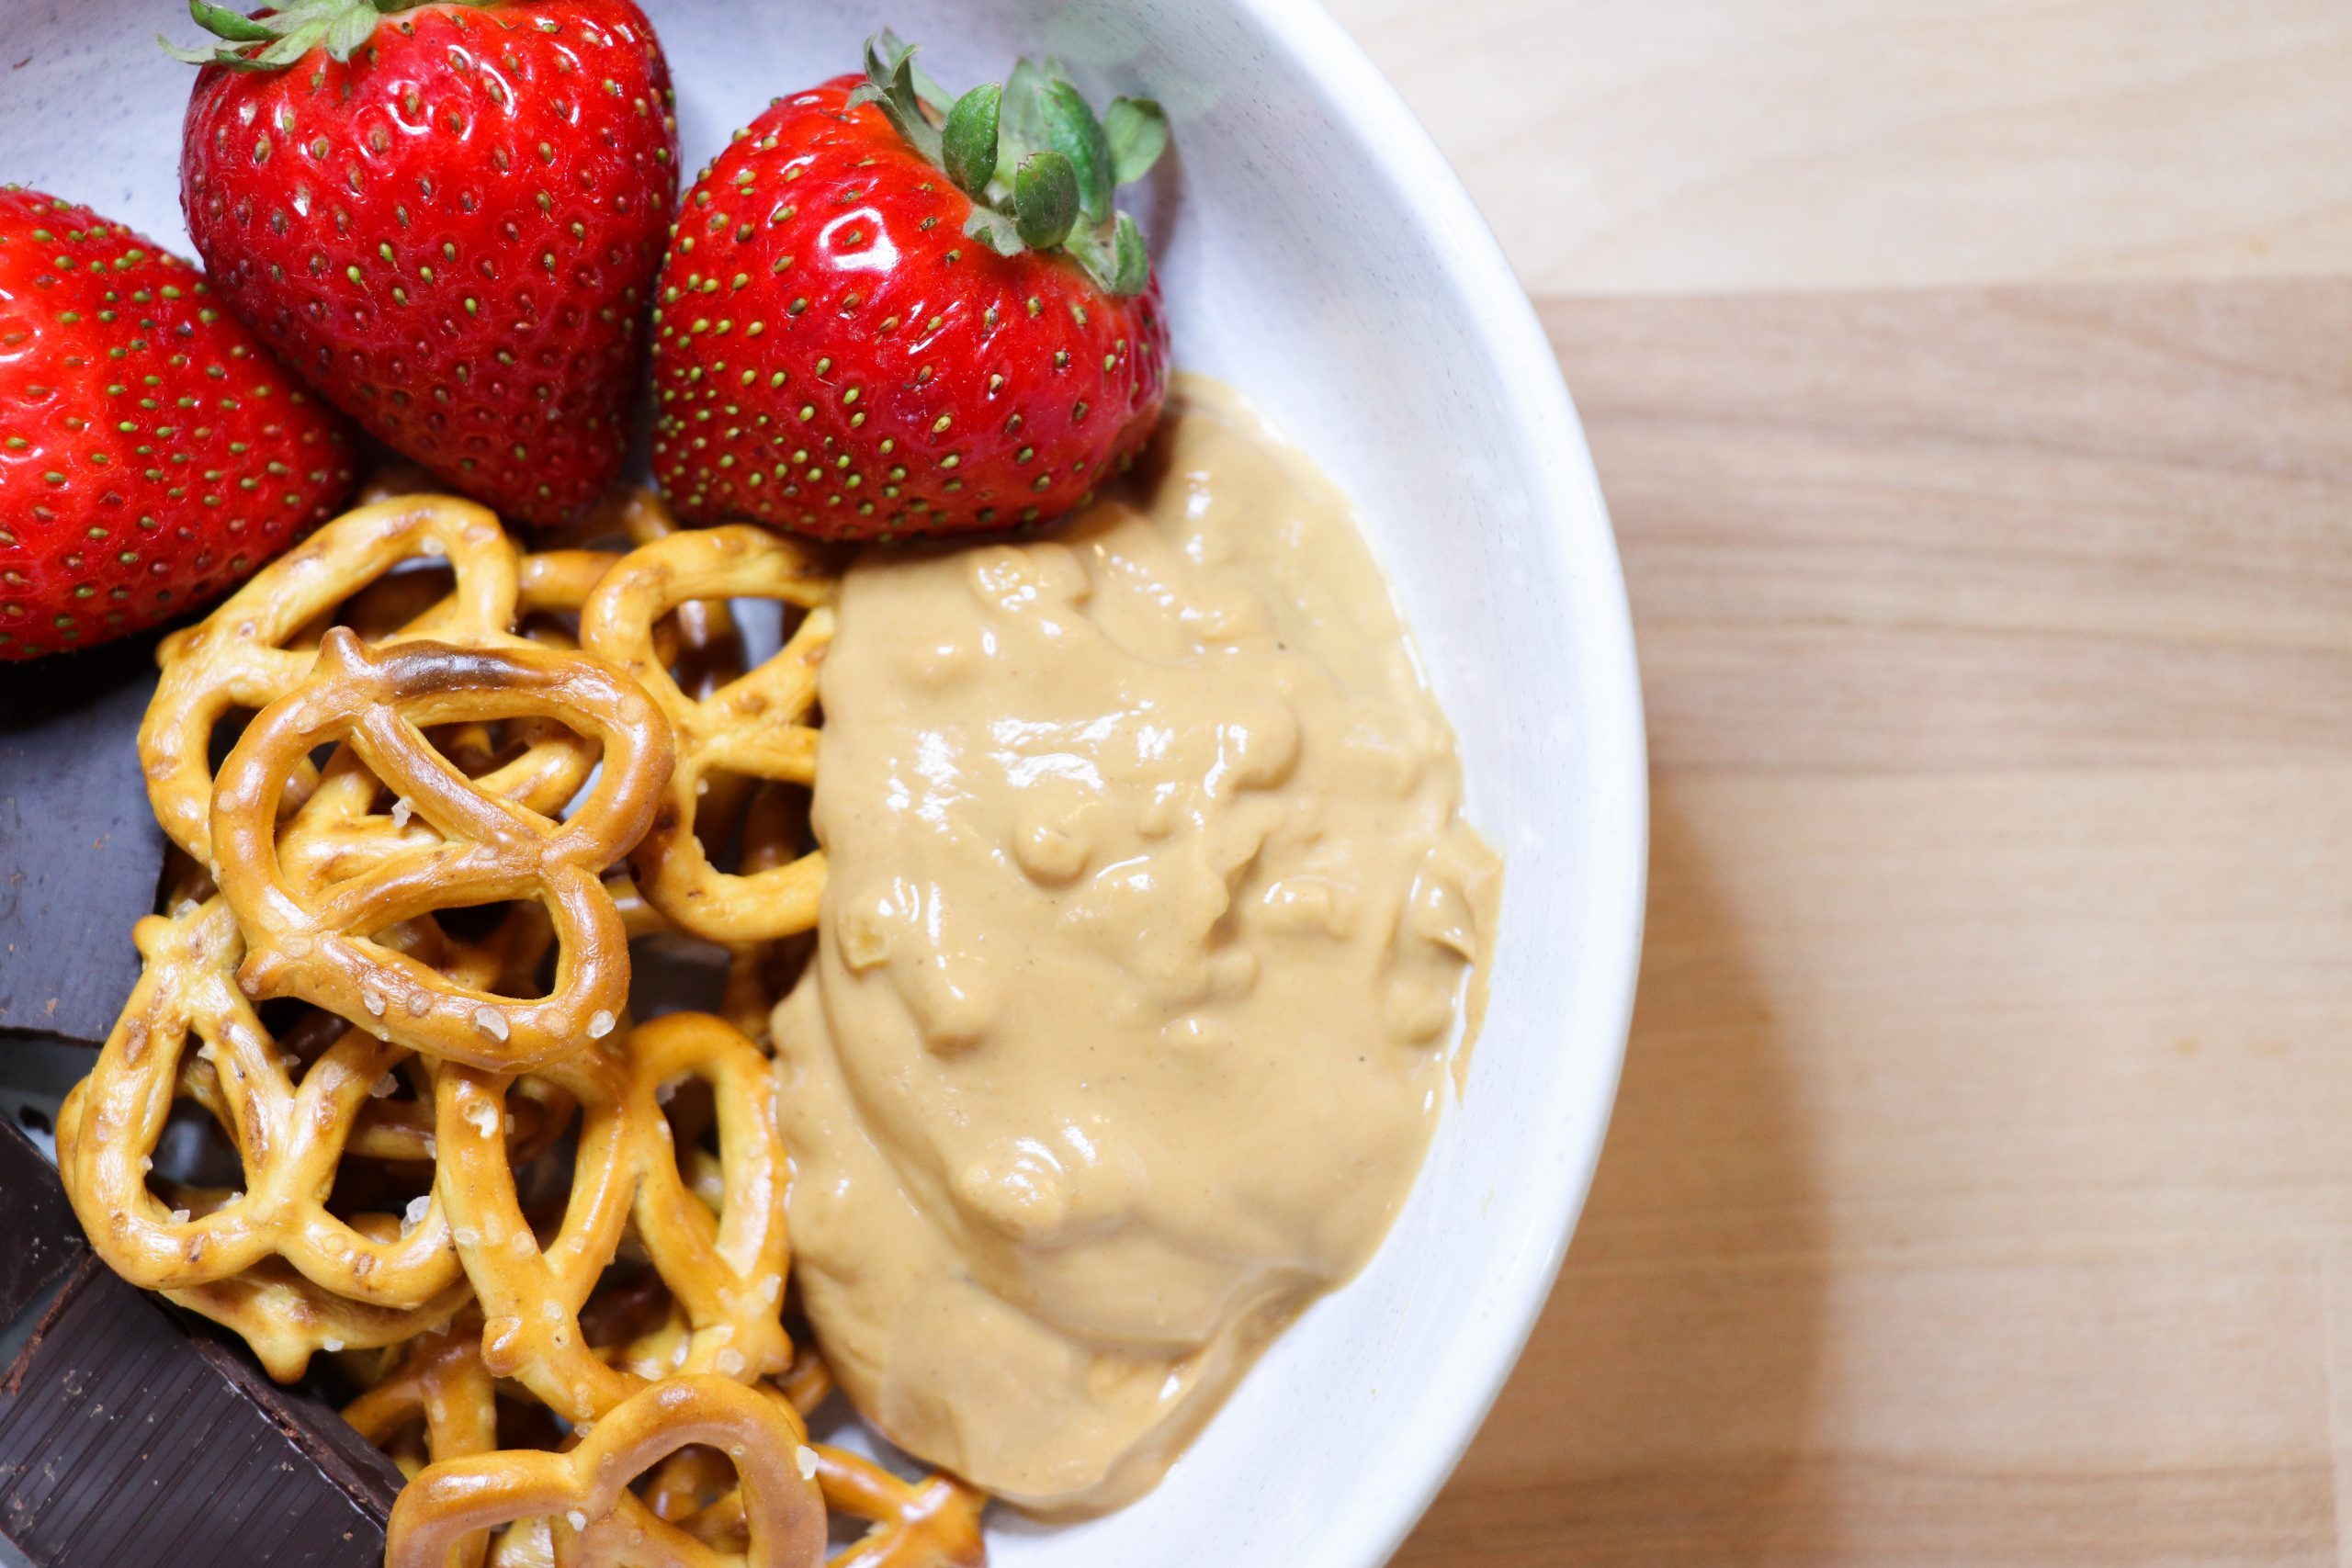 Easy Snack Bowl For Kids - Our Recipe - PB2 Foods